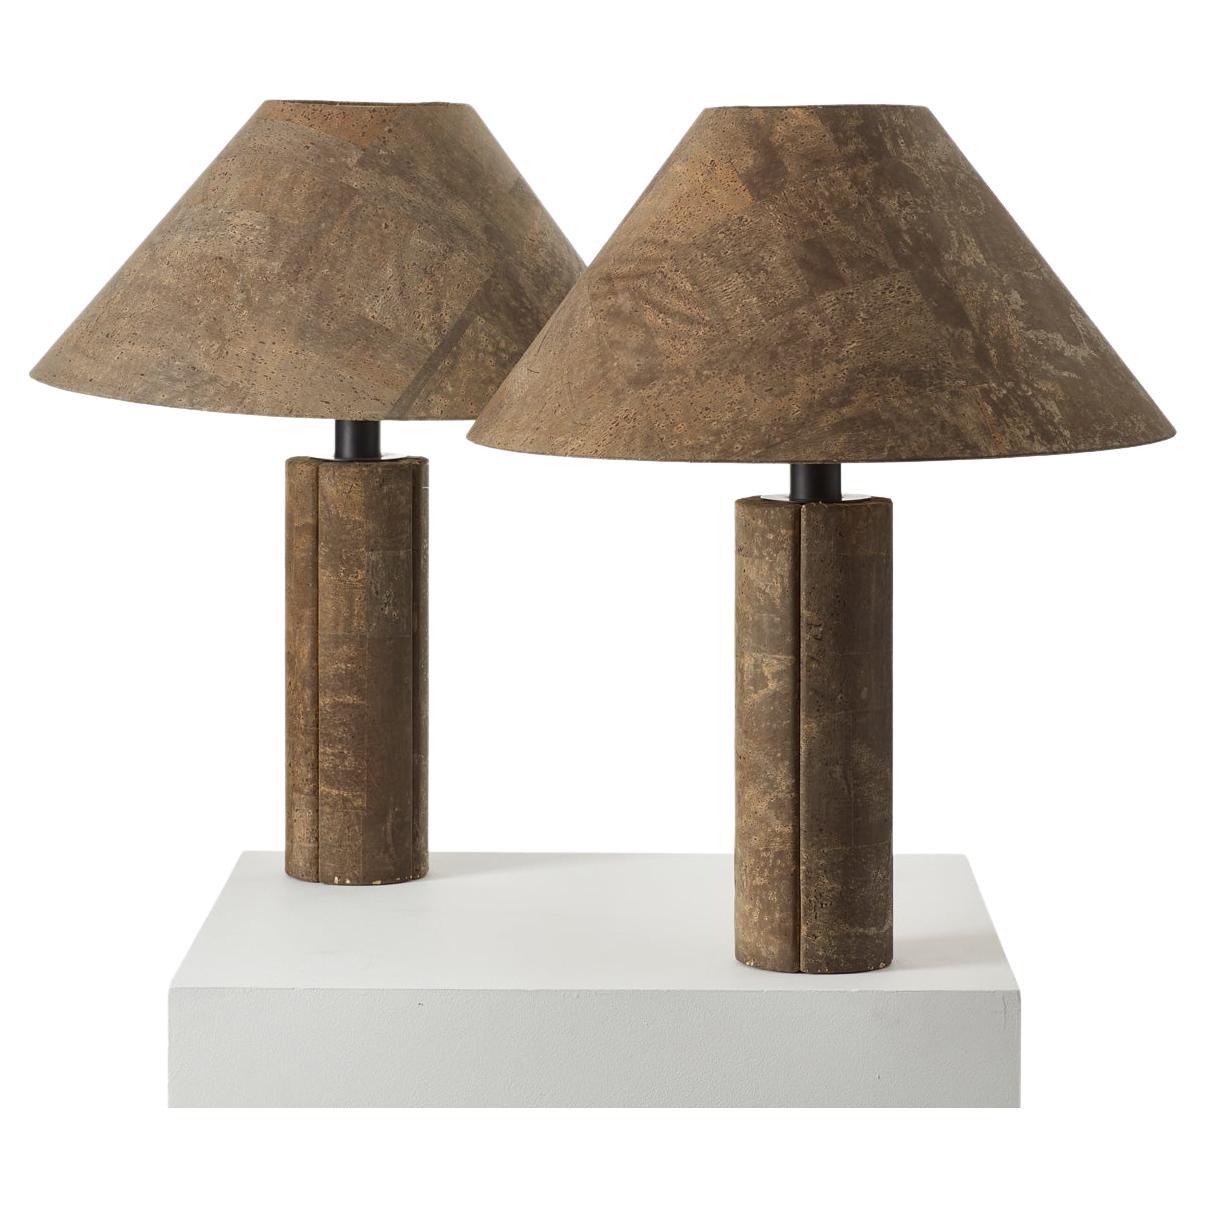 Pair of Ingo Maurer Cork Lamps for Design M, Germany 1974 For Sale